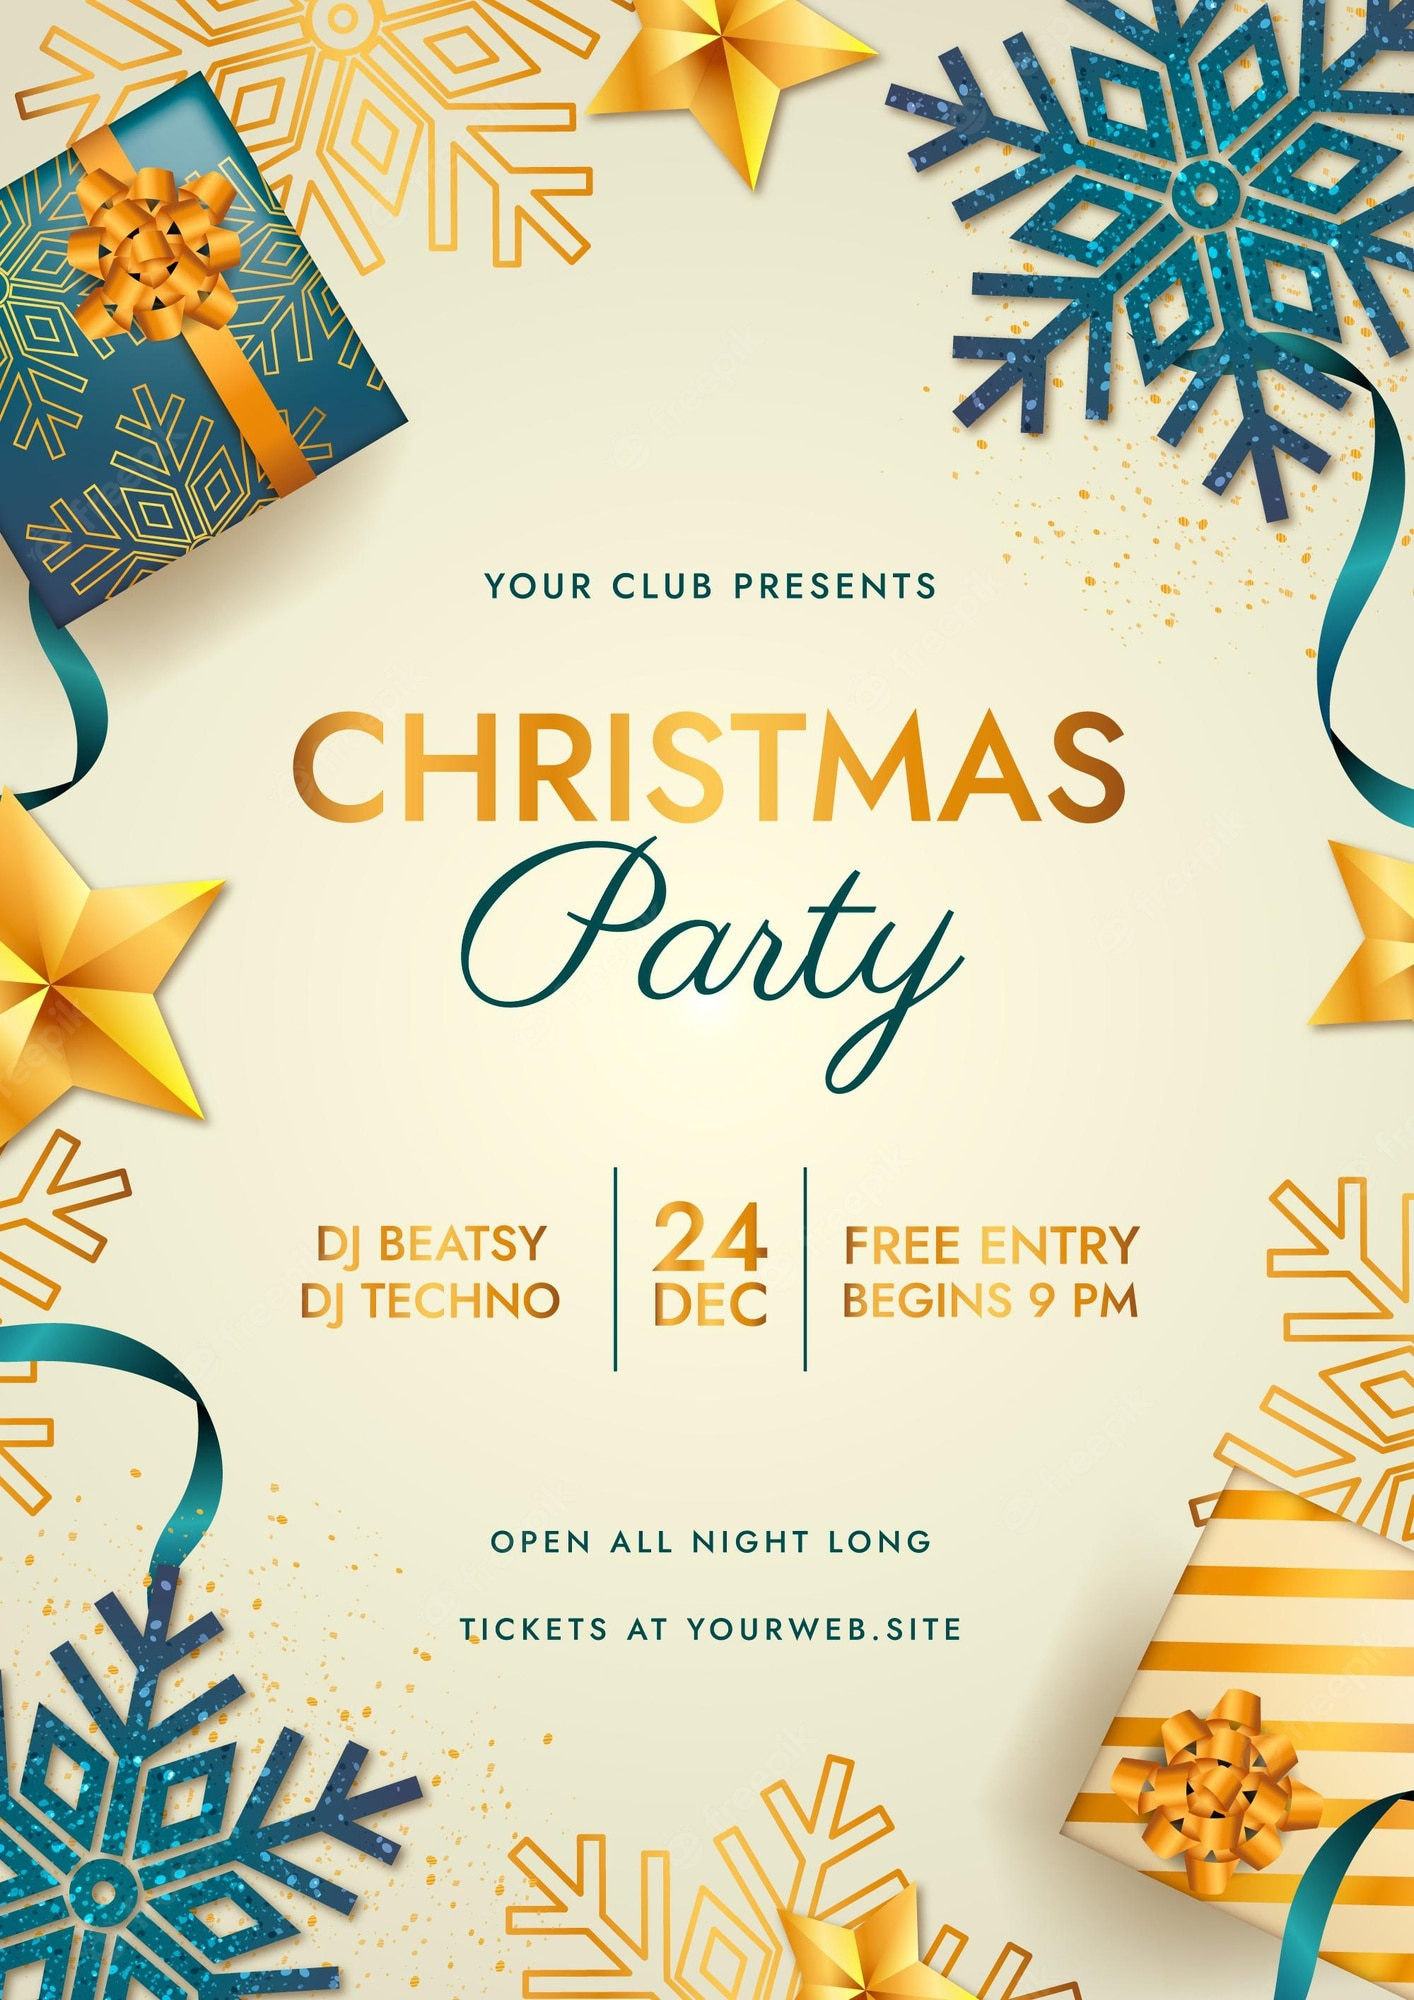 Christmas flyer Images  Free Vectors, Stock Photos & PSD Pertaining To Christmas Brochure Templates Free